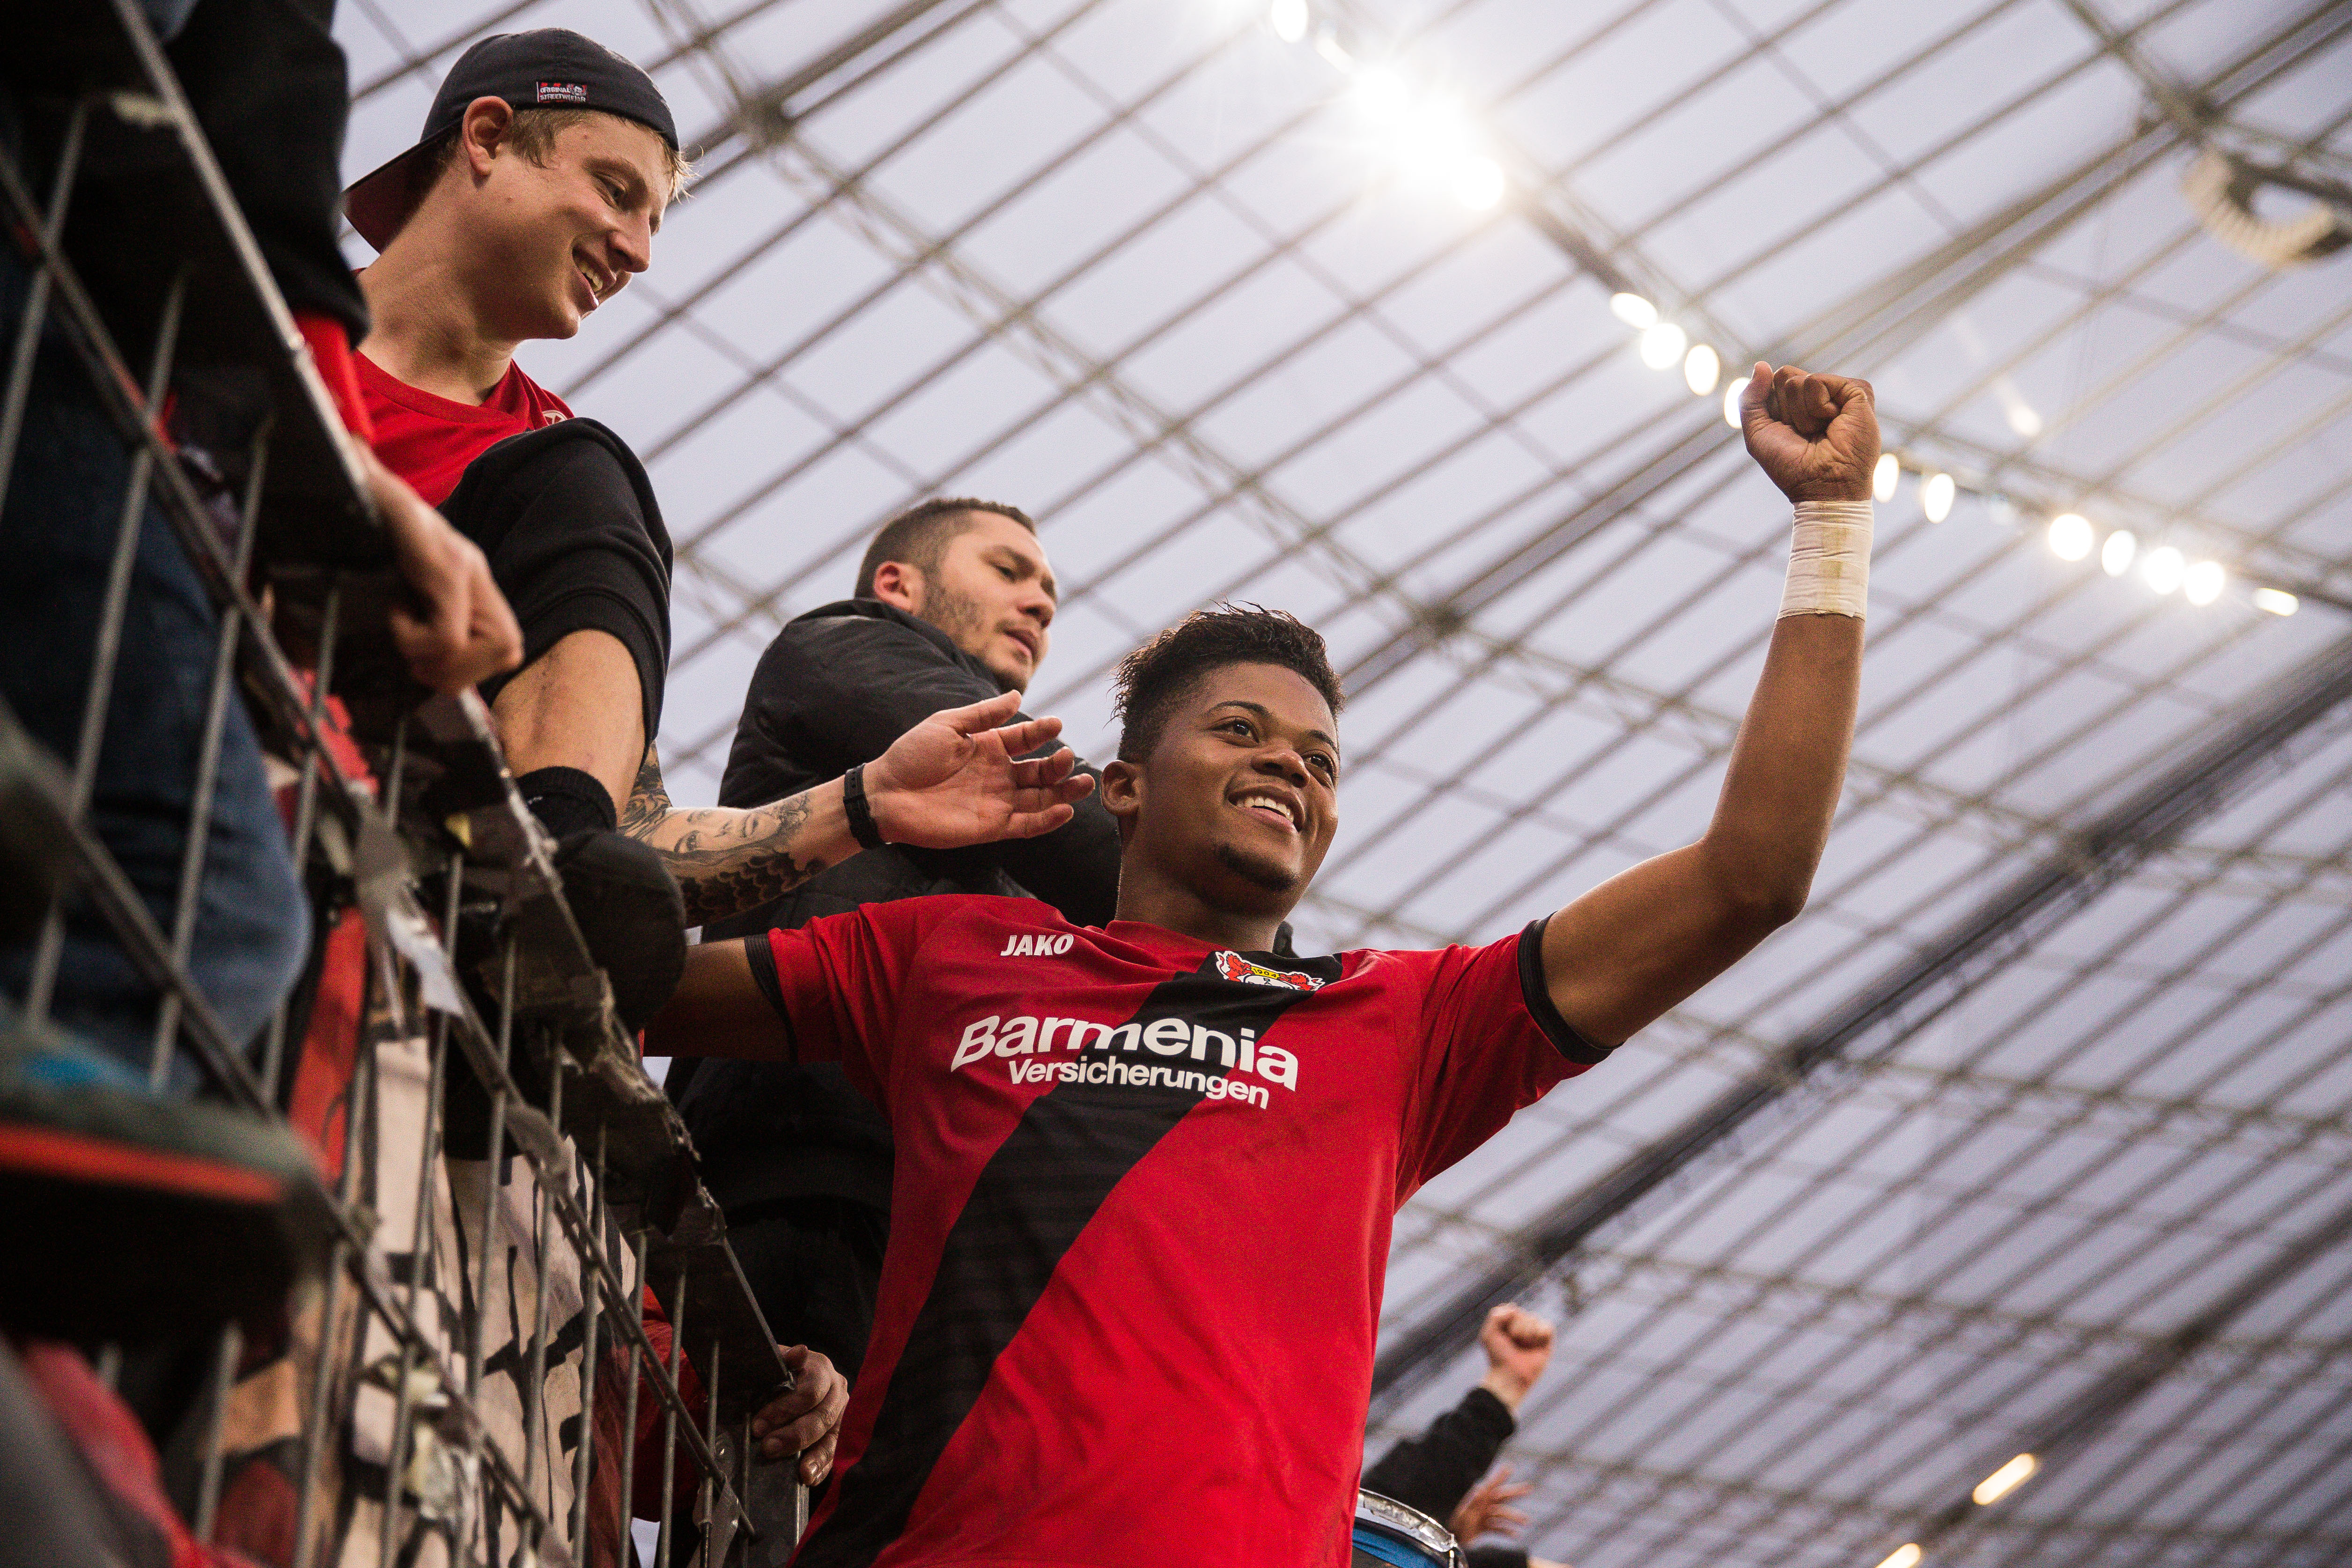 LEVERKUSEN, GERMANY - OCTOBER 28: Leon Bailey of Bayer Leverkusen celebrates with the supporters after the Bundesliga match between Bayer 04 Leverkusen and 1. FC Koeln at BayArena on October 28, 2017 in Leverkusen, Germany. (Photo by Maja Hitij/Bongarts/Getty Images)